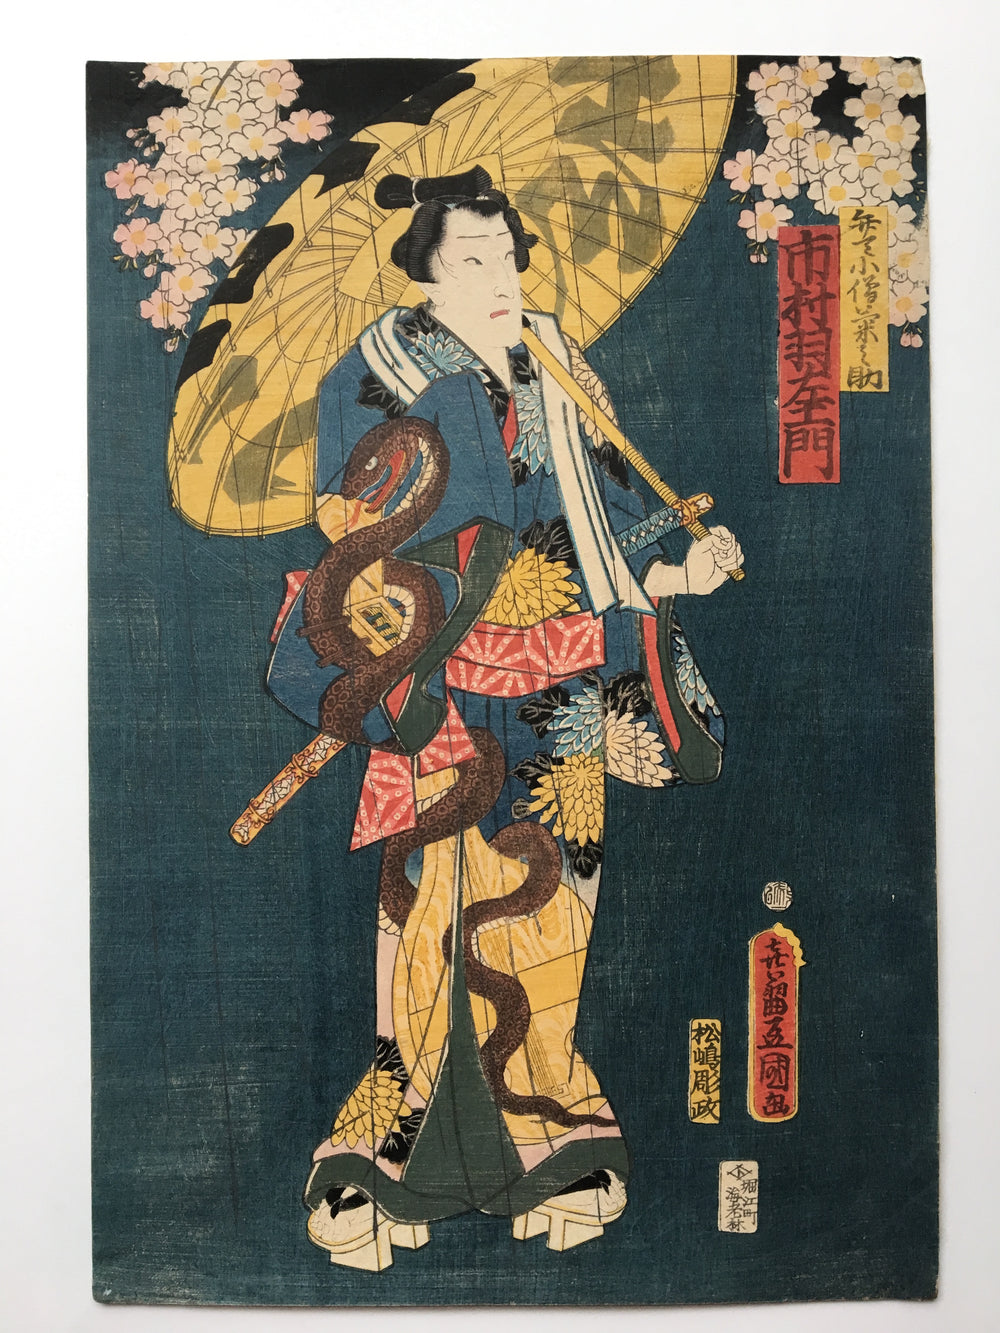 The Story of Aoto and the Gorgeous Woodblock Print (Toyokuni III, 1862)